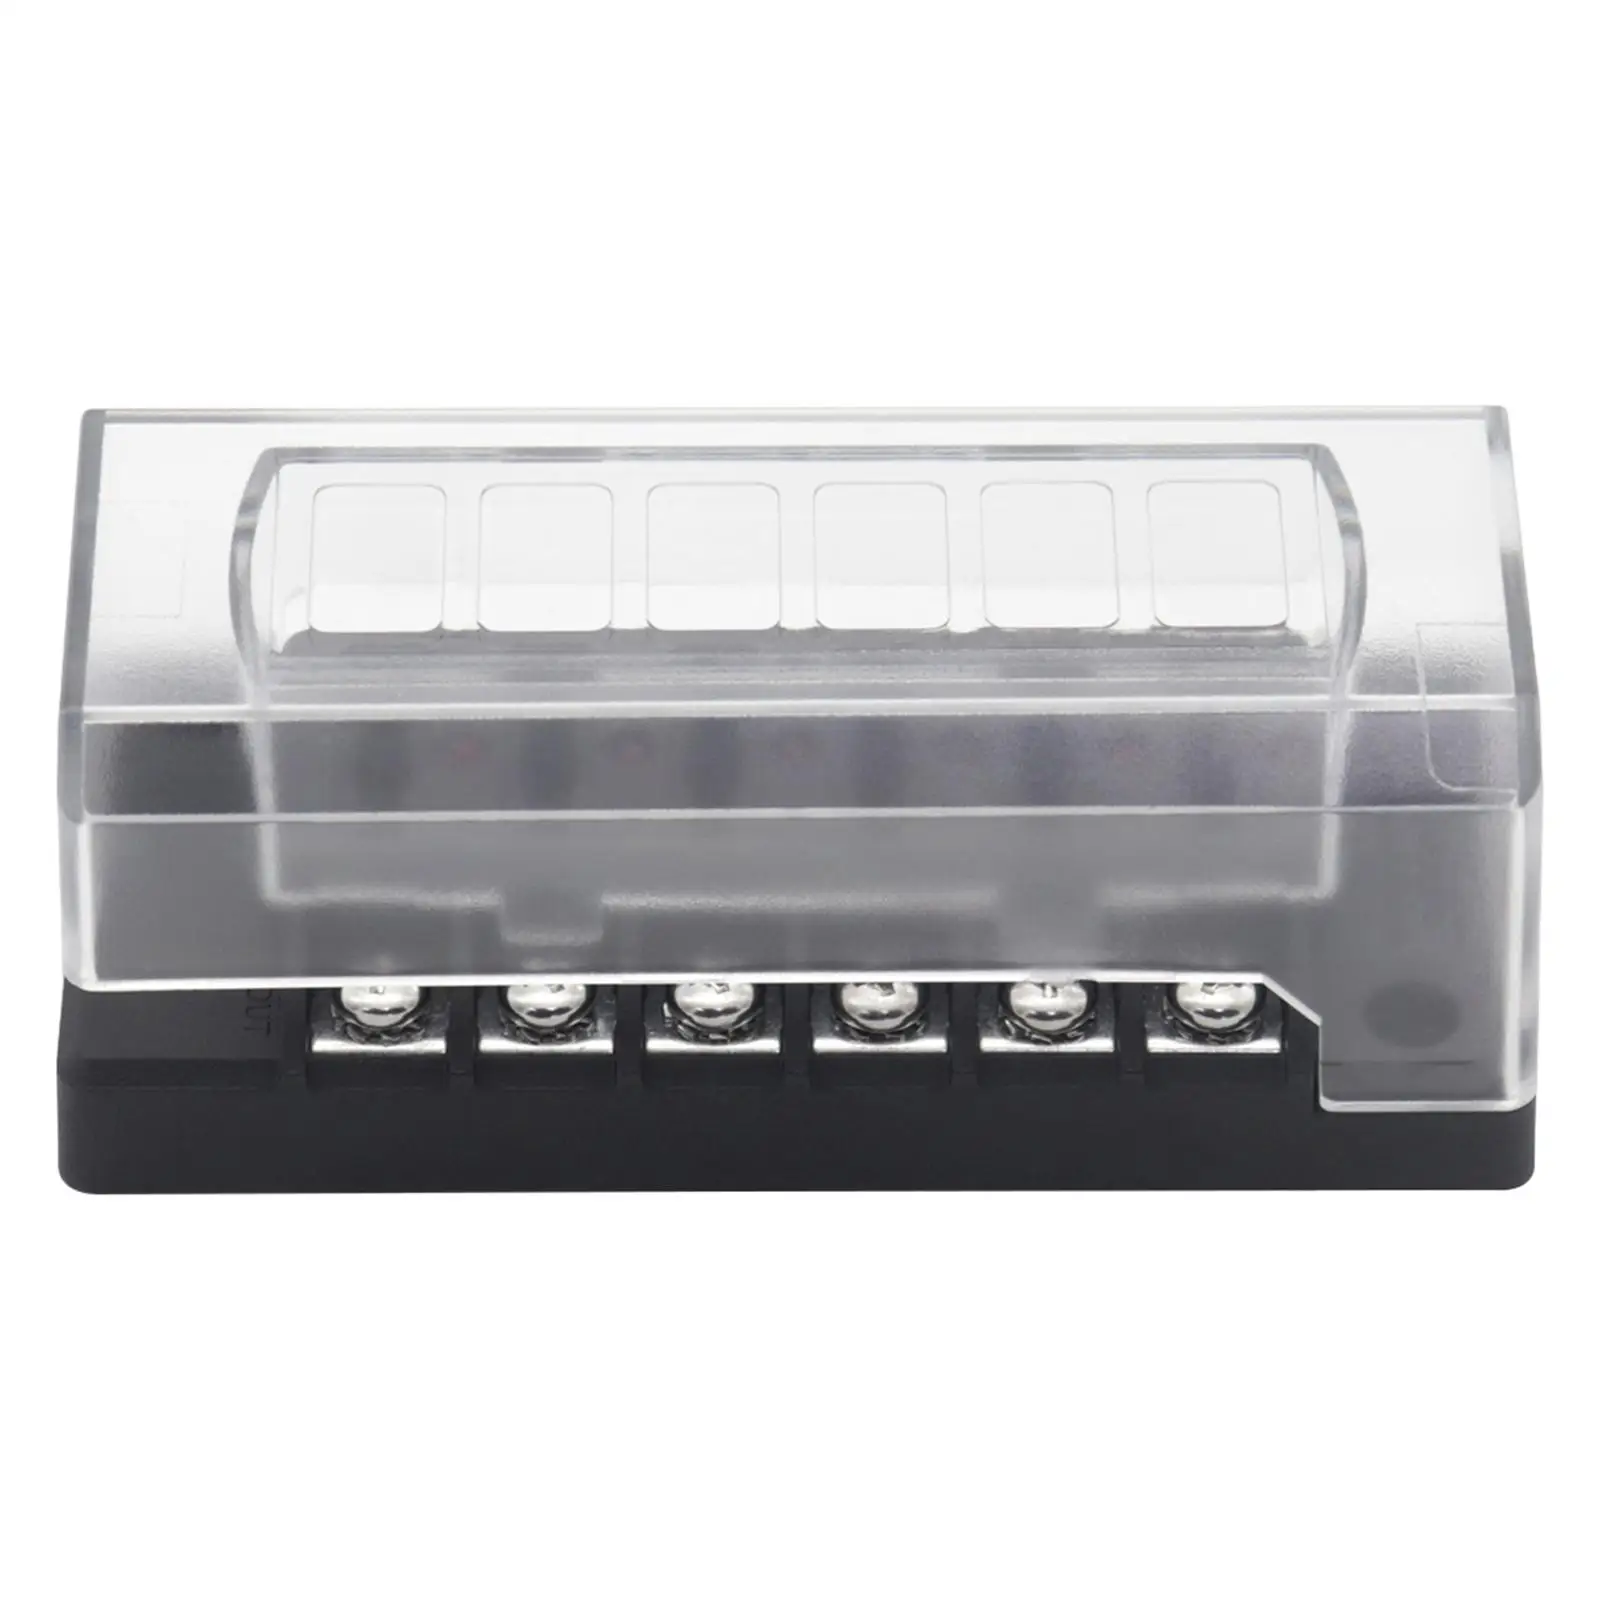   Fuse Block Box Waterproof Protection Cover Holder for Van Trailer